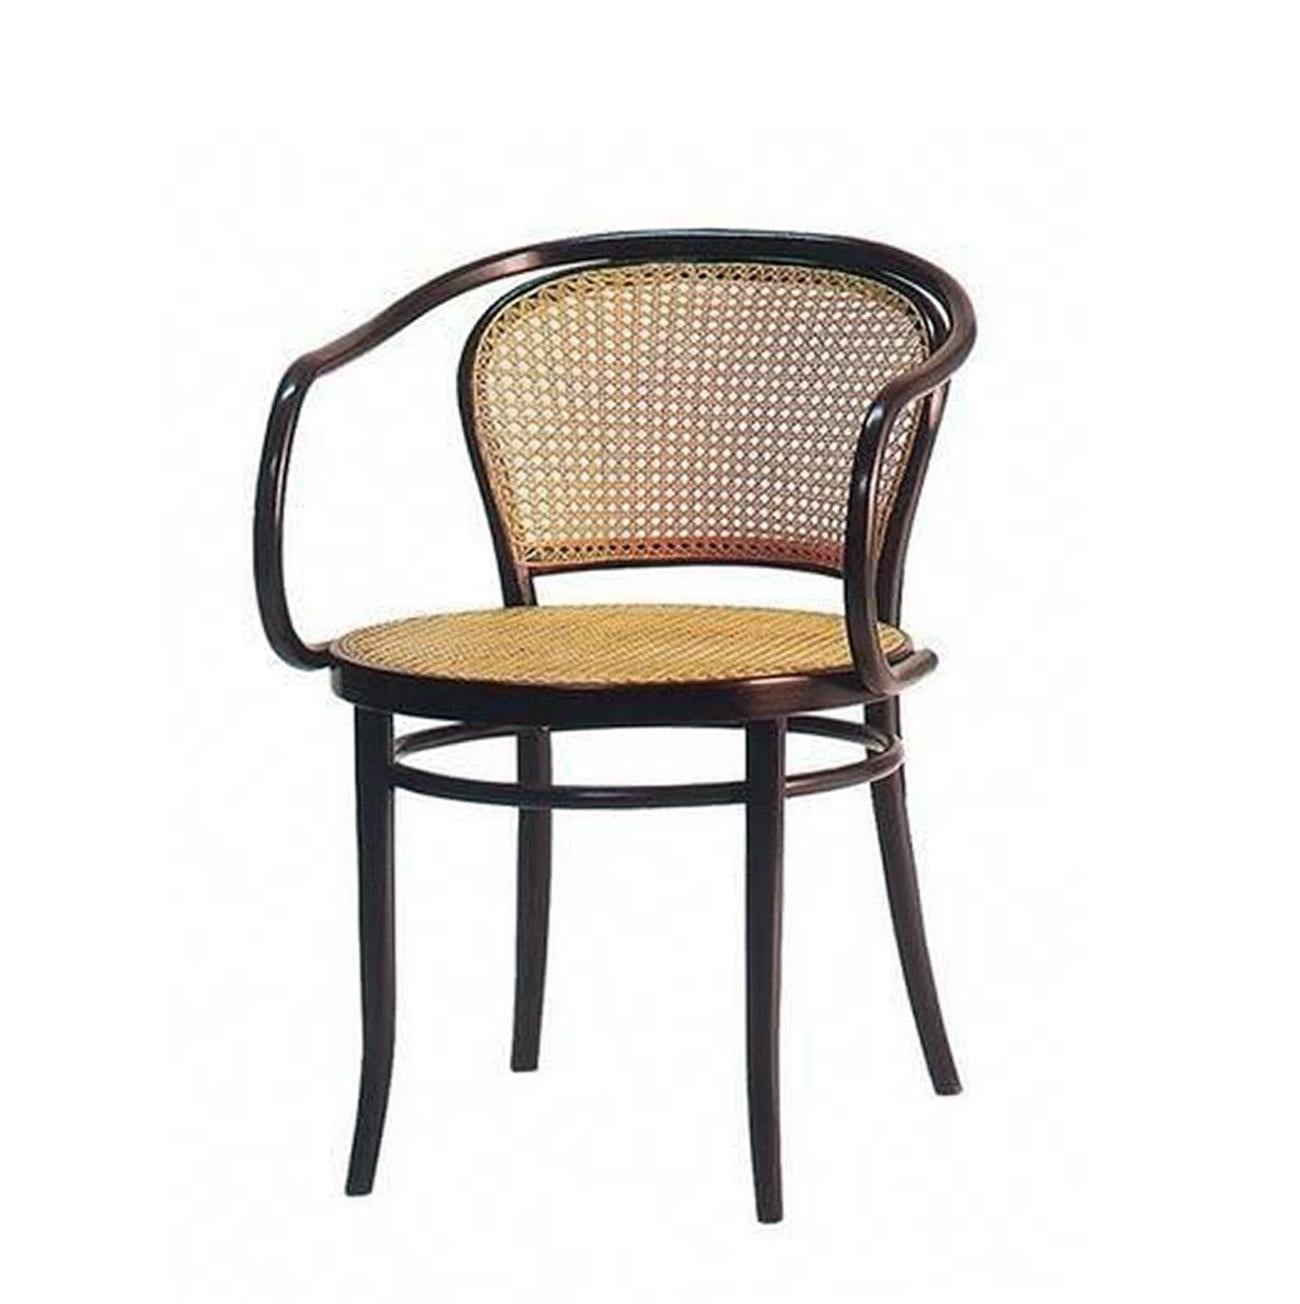 Dark brown color

The August Thonet 33 B9 bentwood chair is manufactured in an original Michael Thonet factory in the Czech Republic..Made in the Czech Republic

They are in very very good condition, they are hardly used, ready to be used .Original